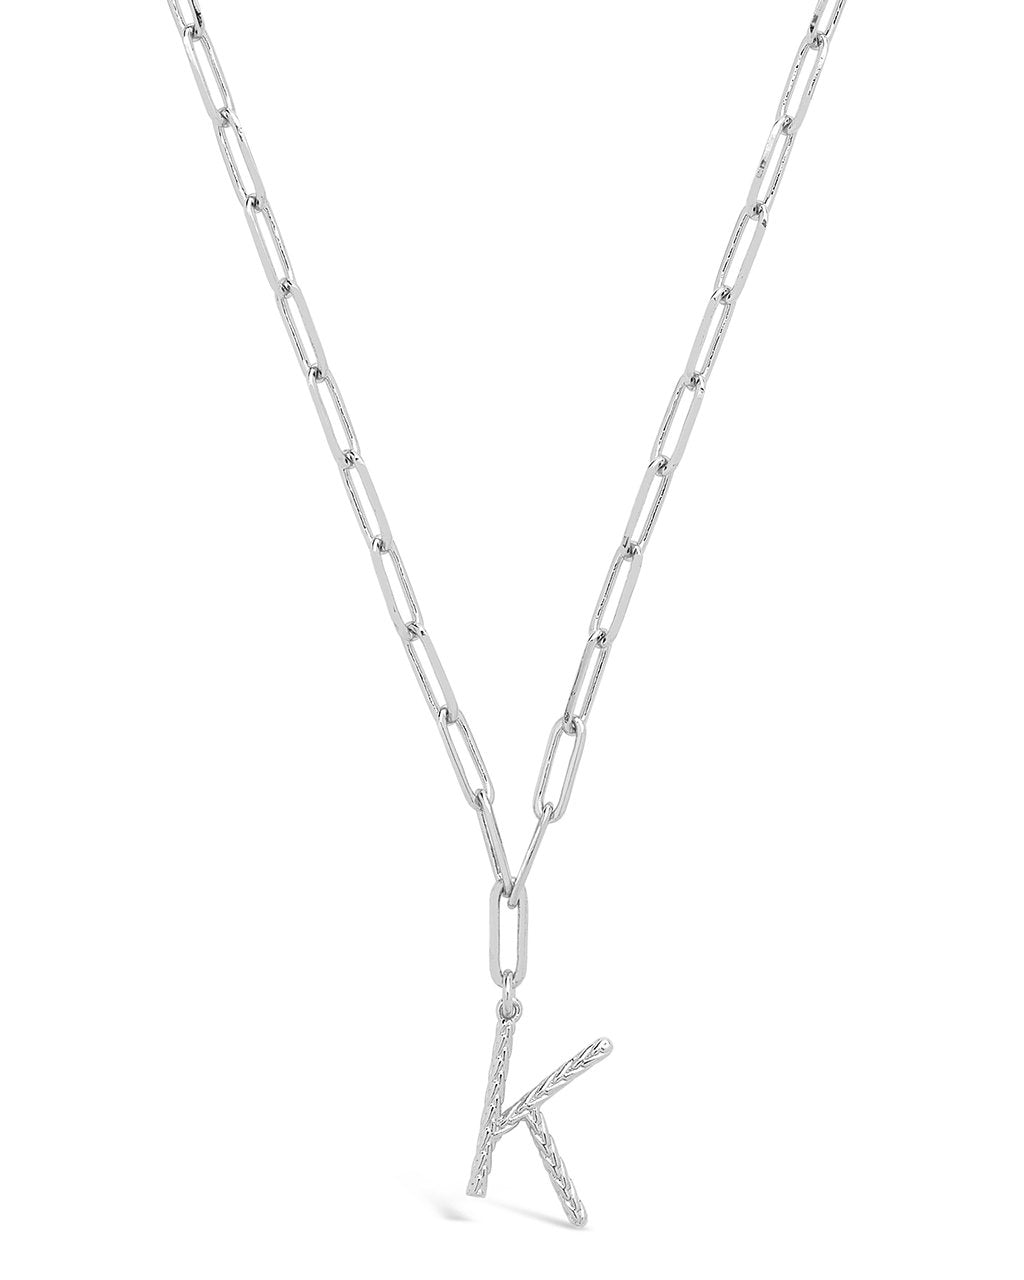 Braided Initial Pendant Necklace Necklace Sterling Forever Silver K 